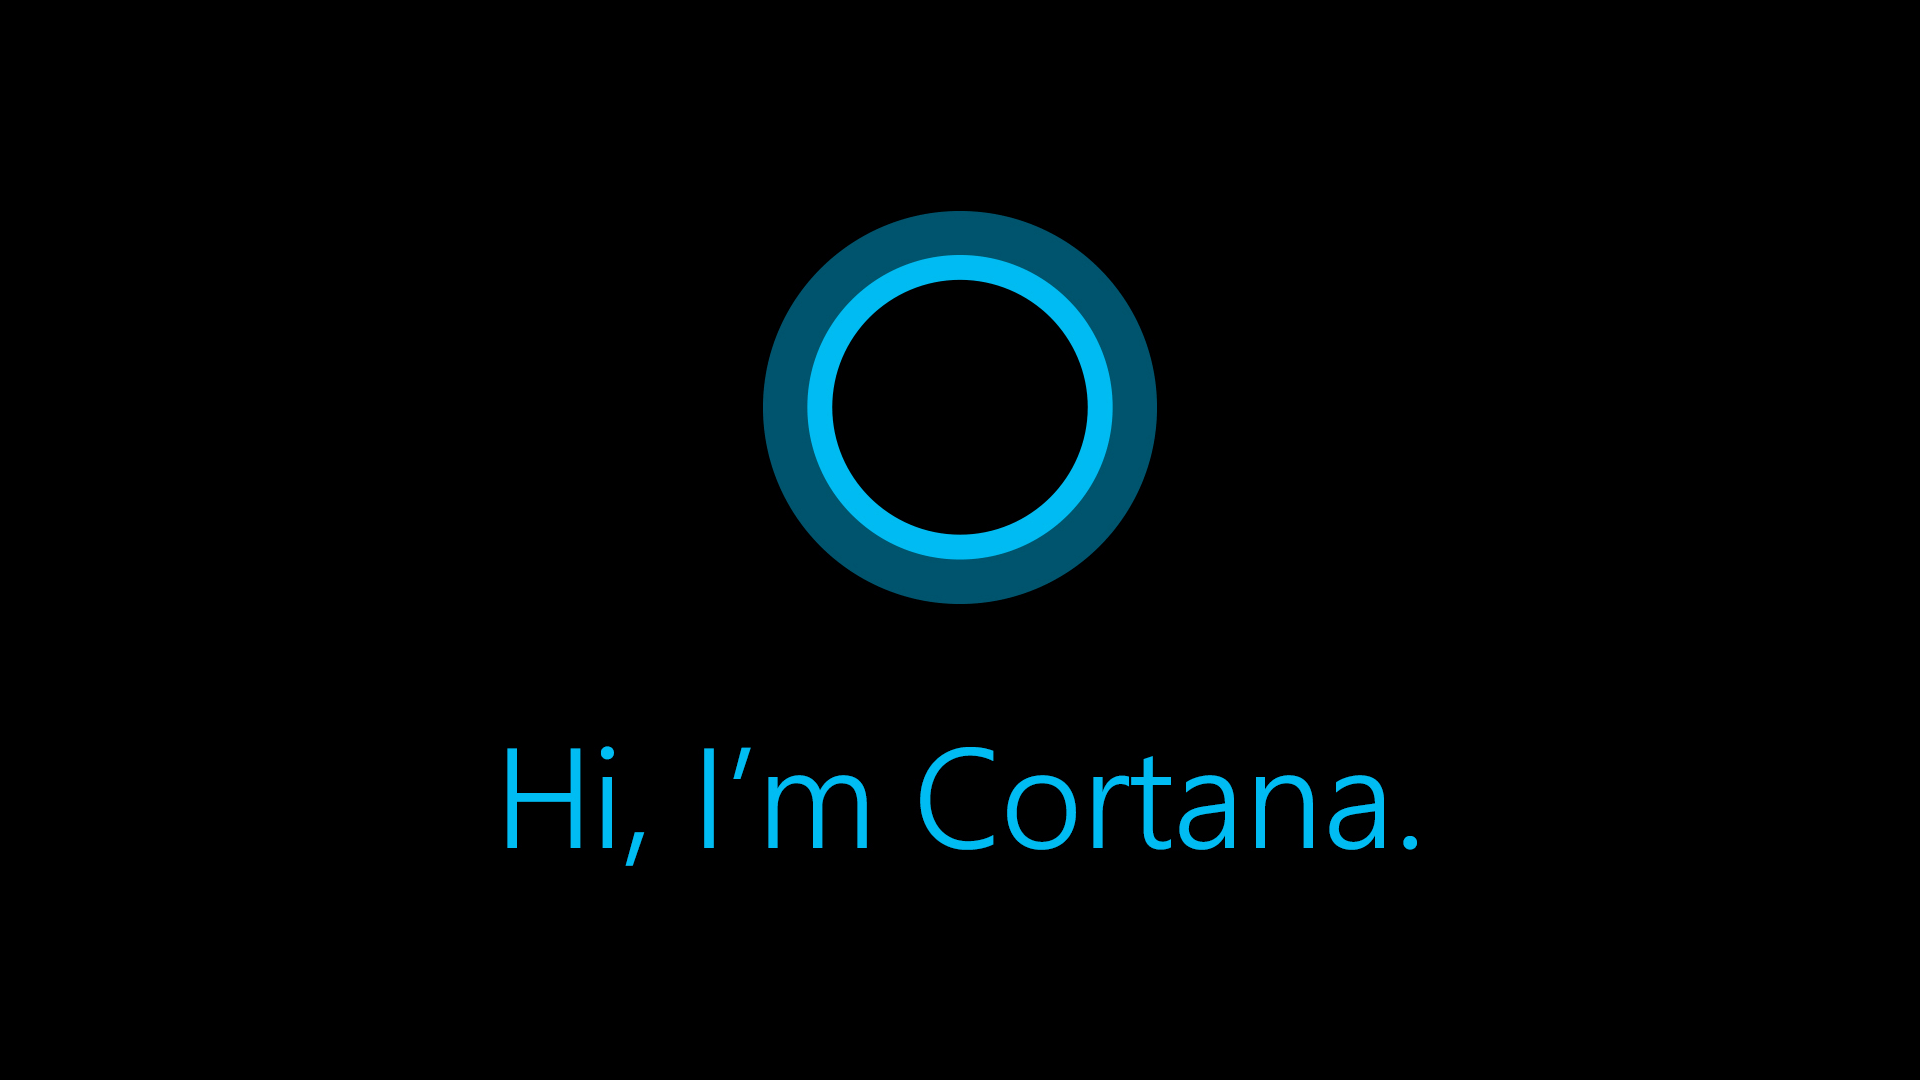 How to Disable Cortana in Windows 10?